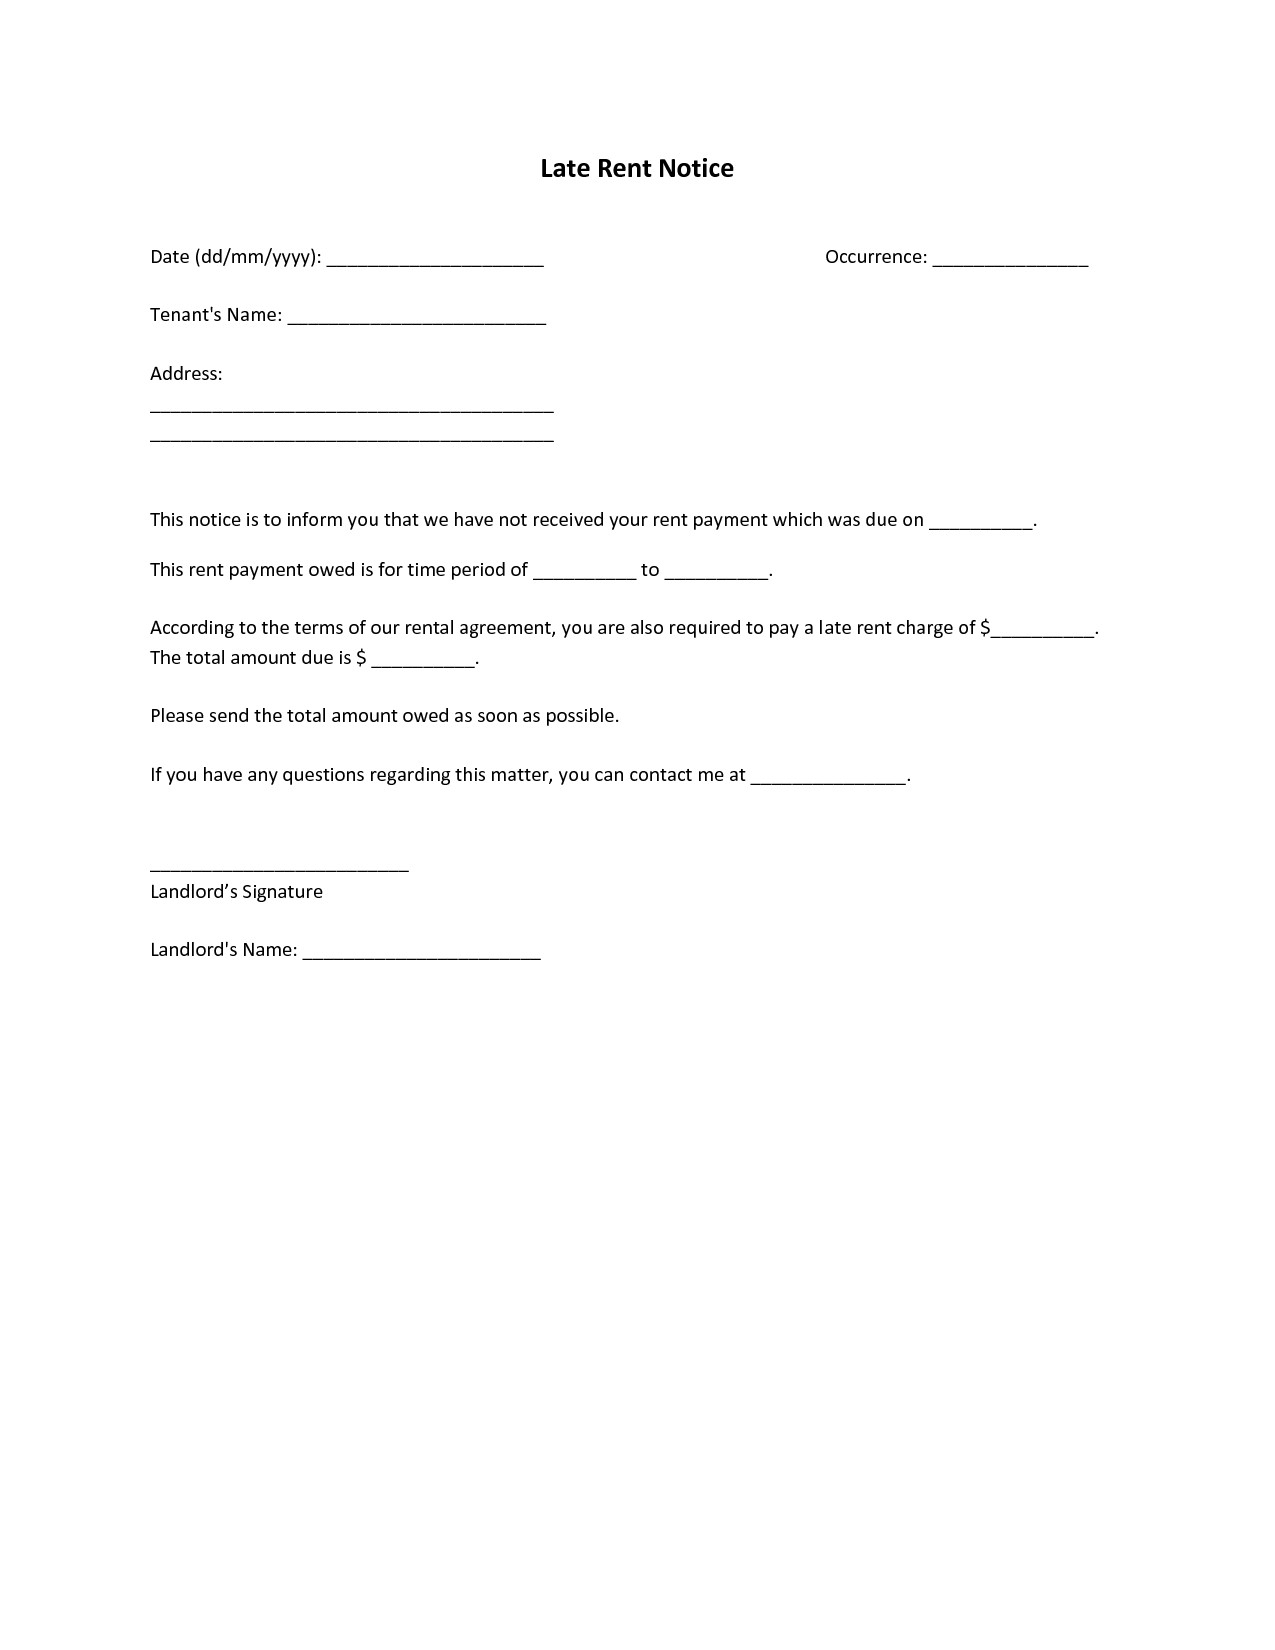 Past Due Rent Letter Template - Past Due Letter Template Beautiful Sample Interest Letter for